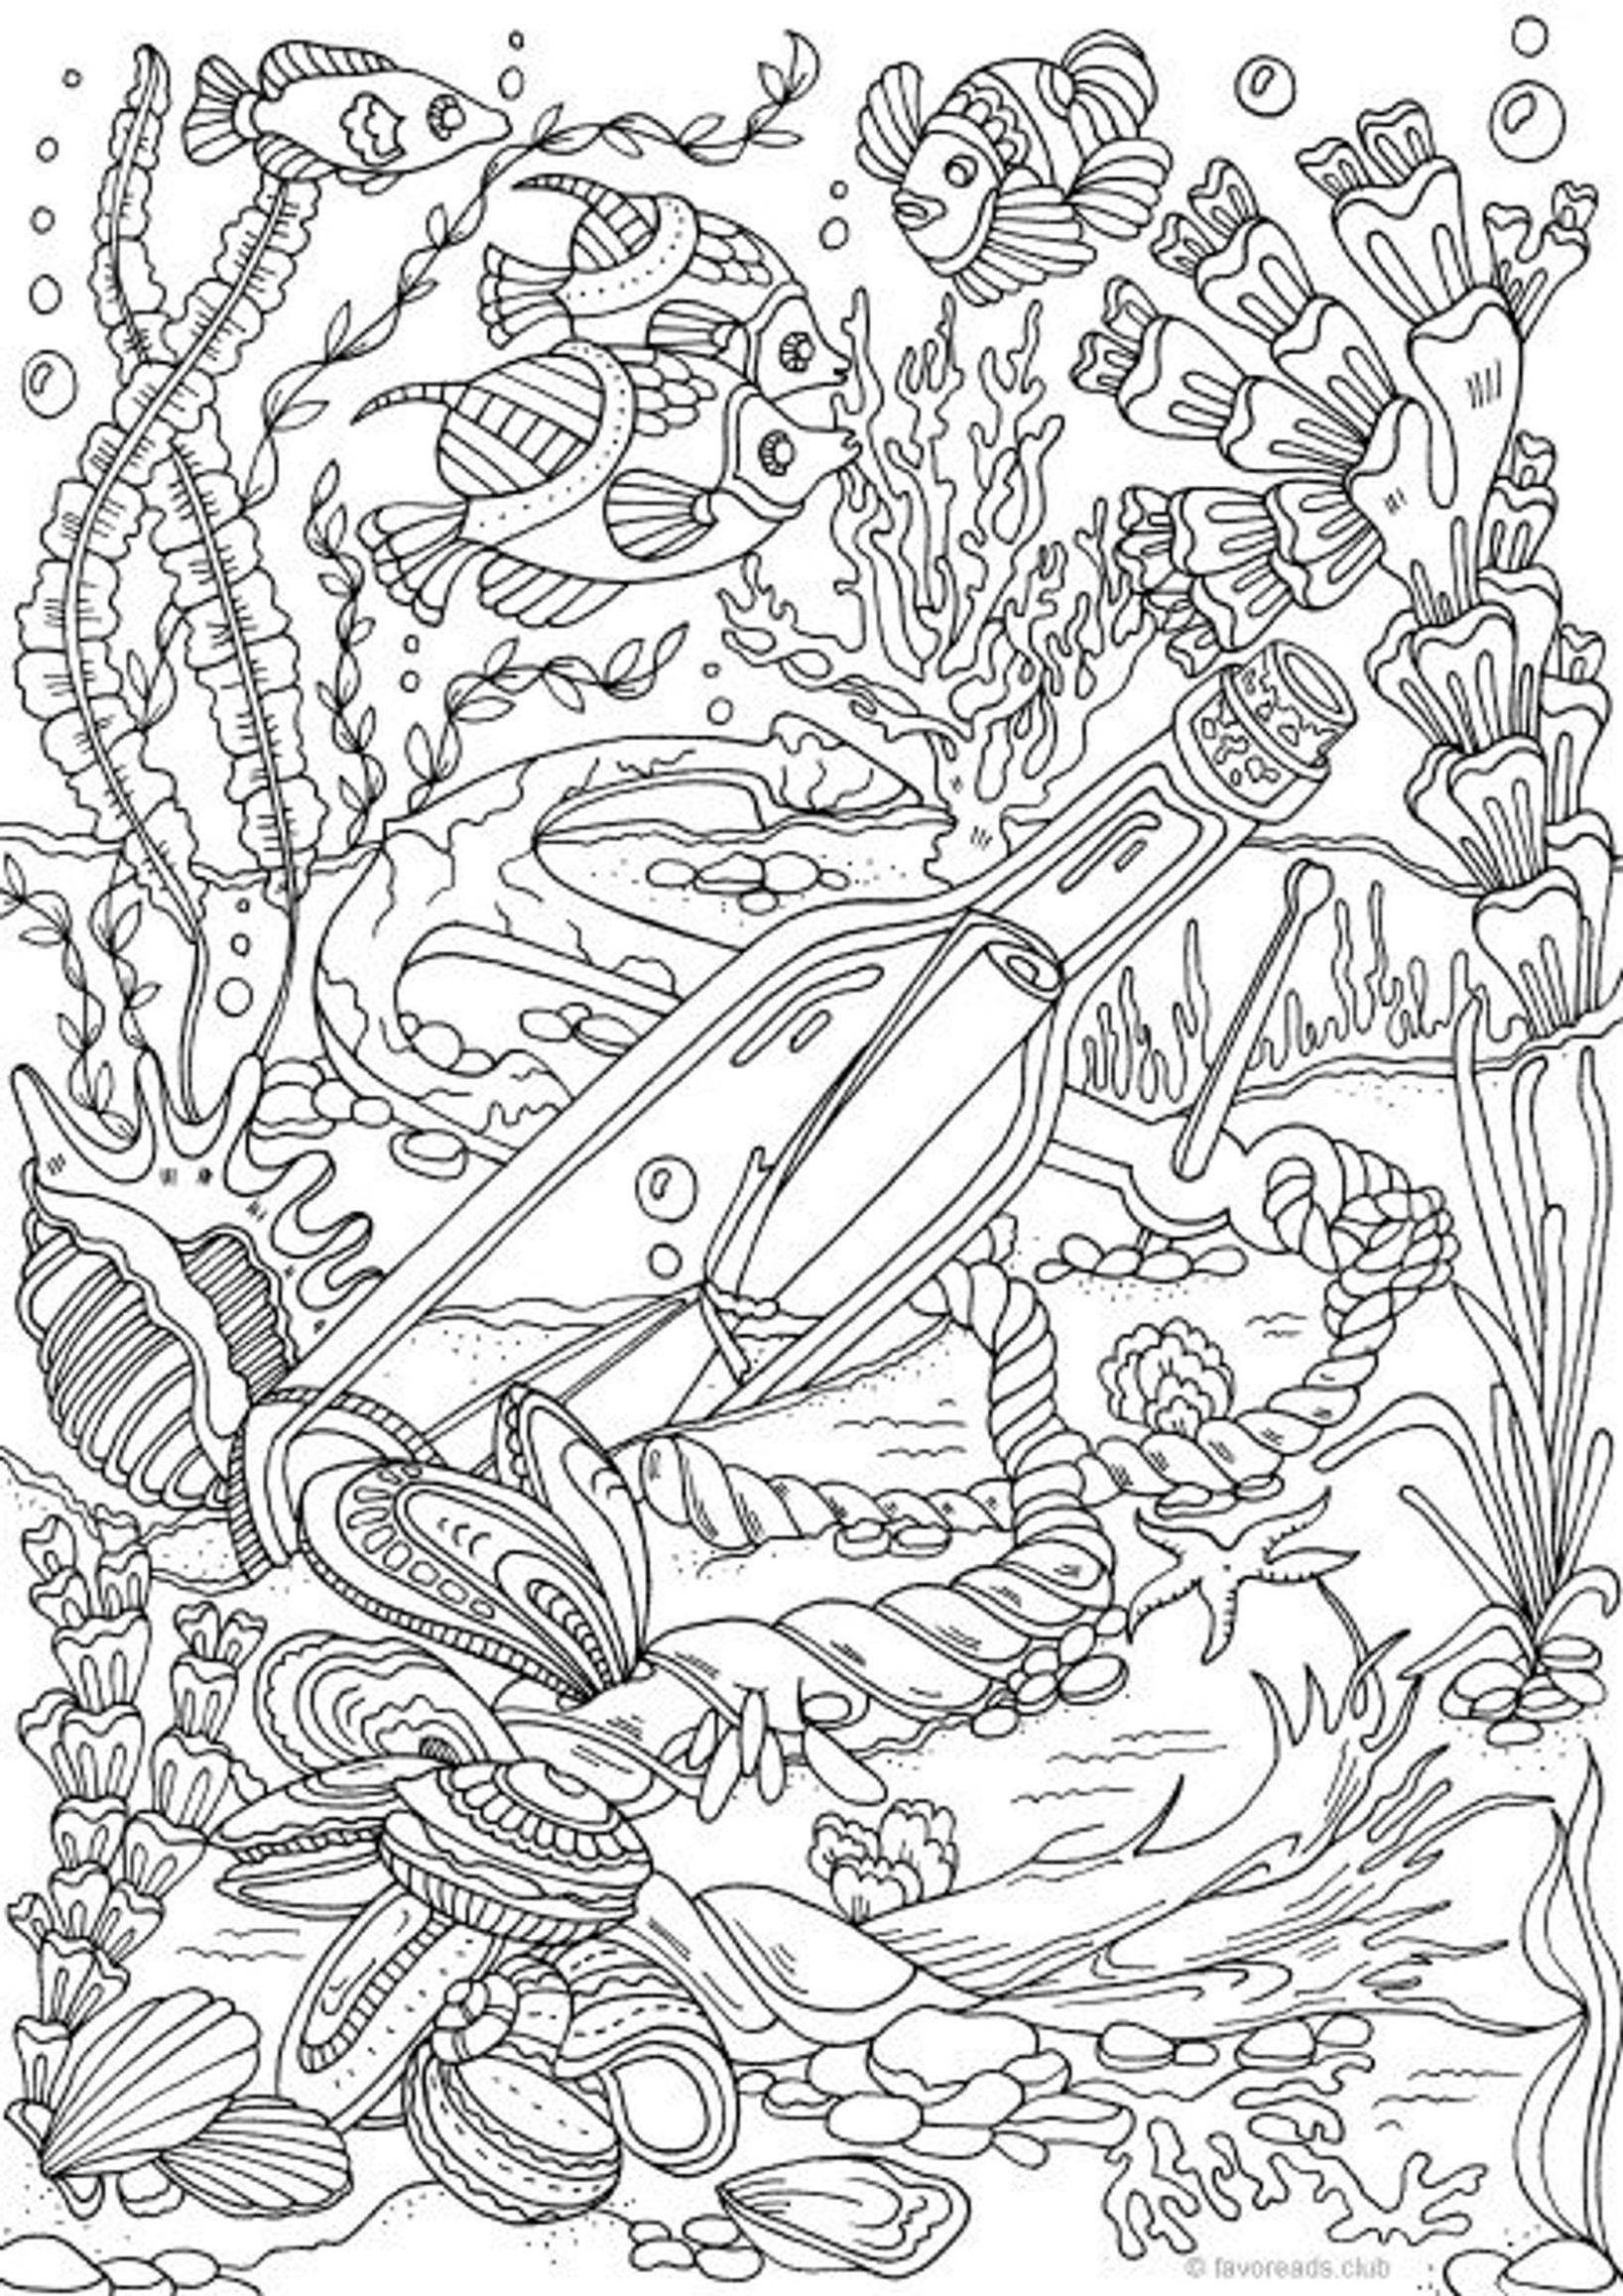 Get This Ocean Coloring Pages for Adults Free Printable A Message